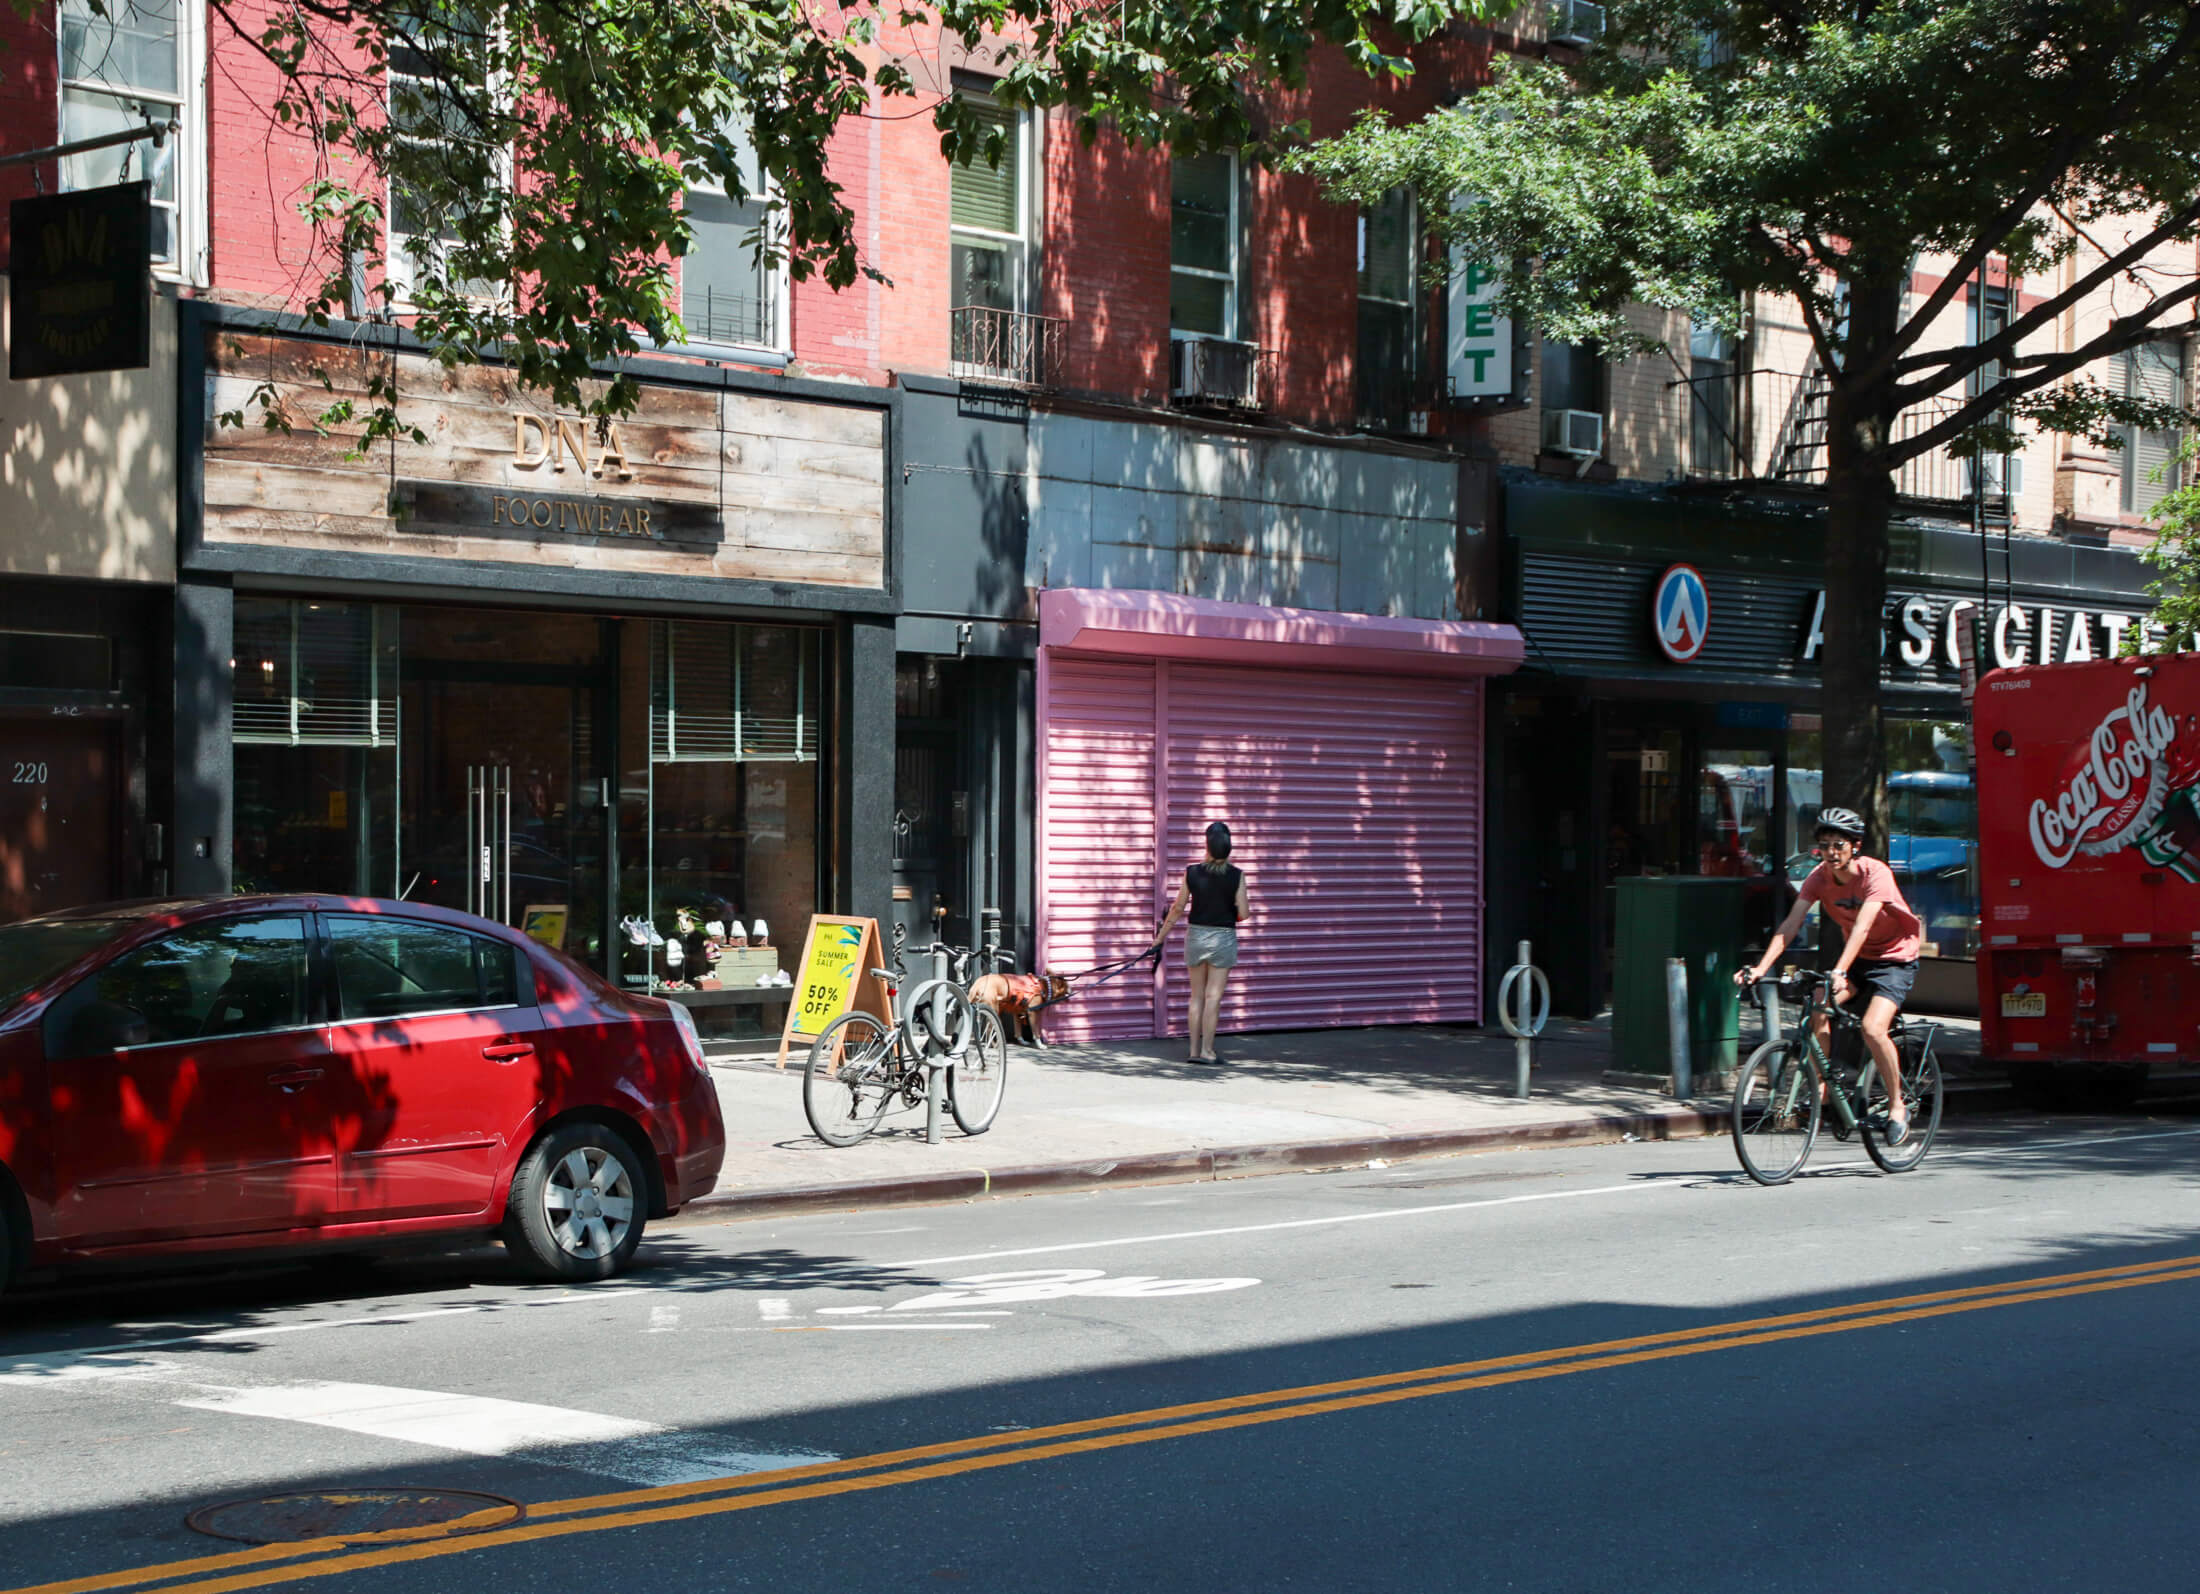 view of the pink roll down gate in front of the storefront